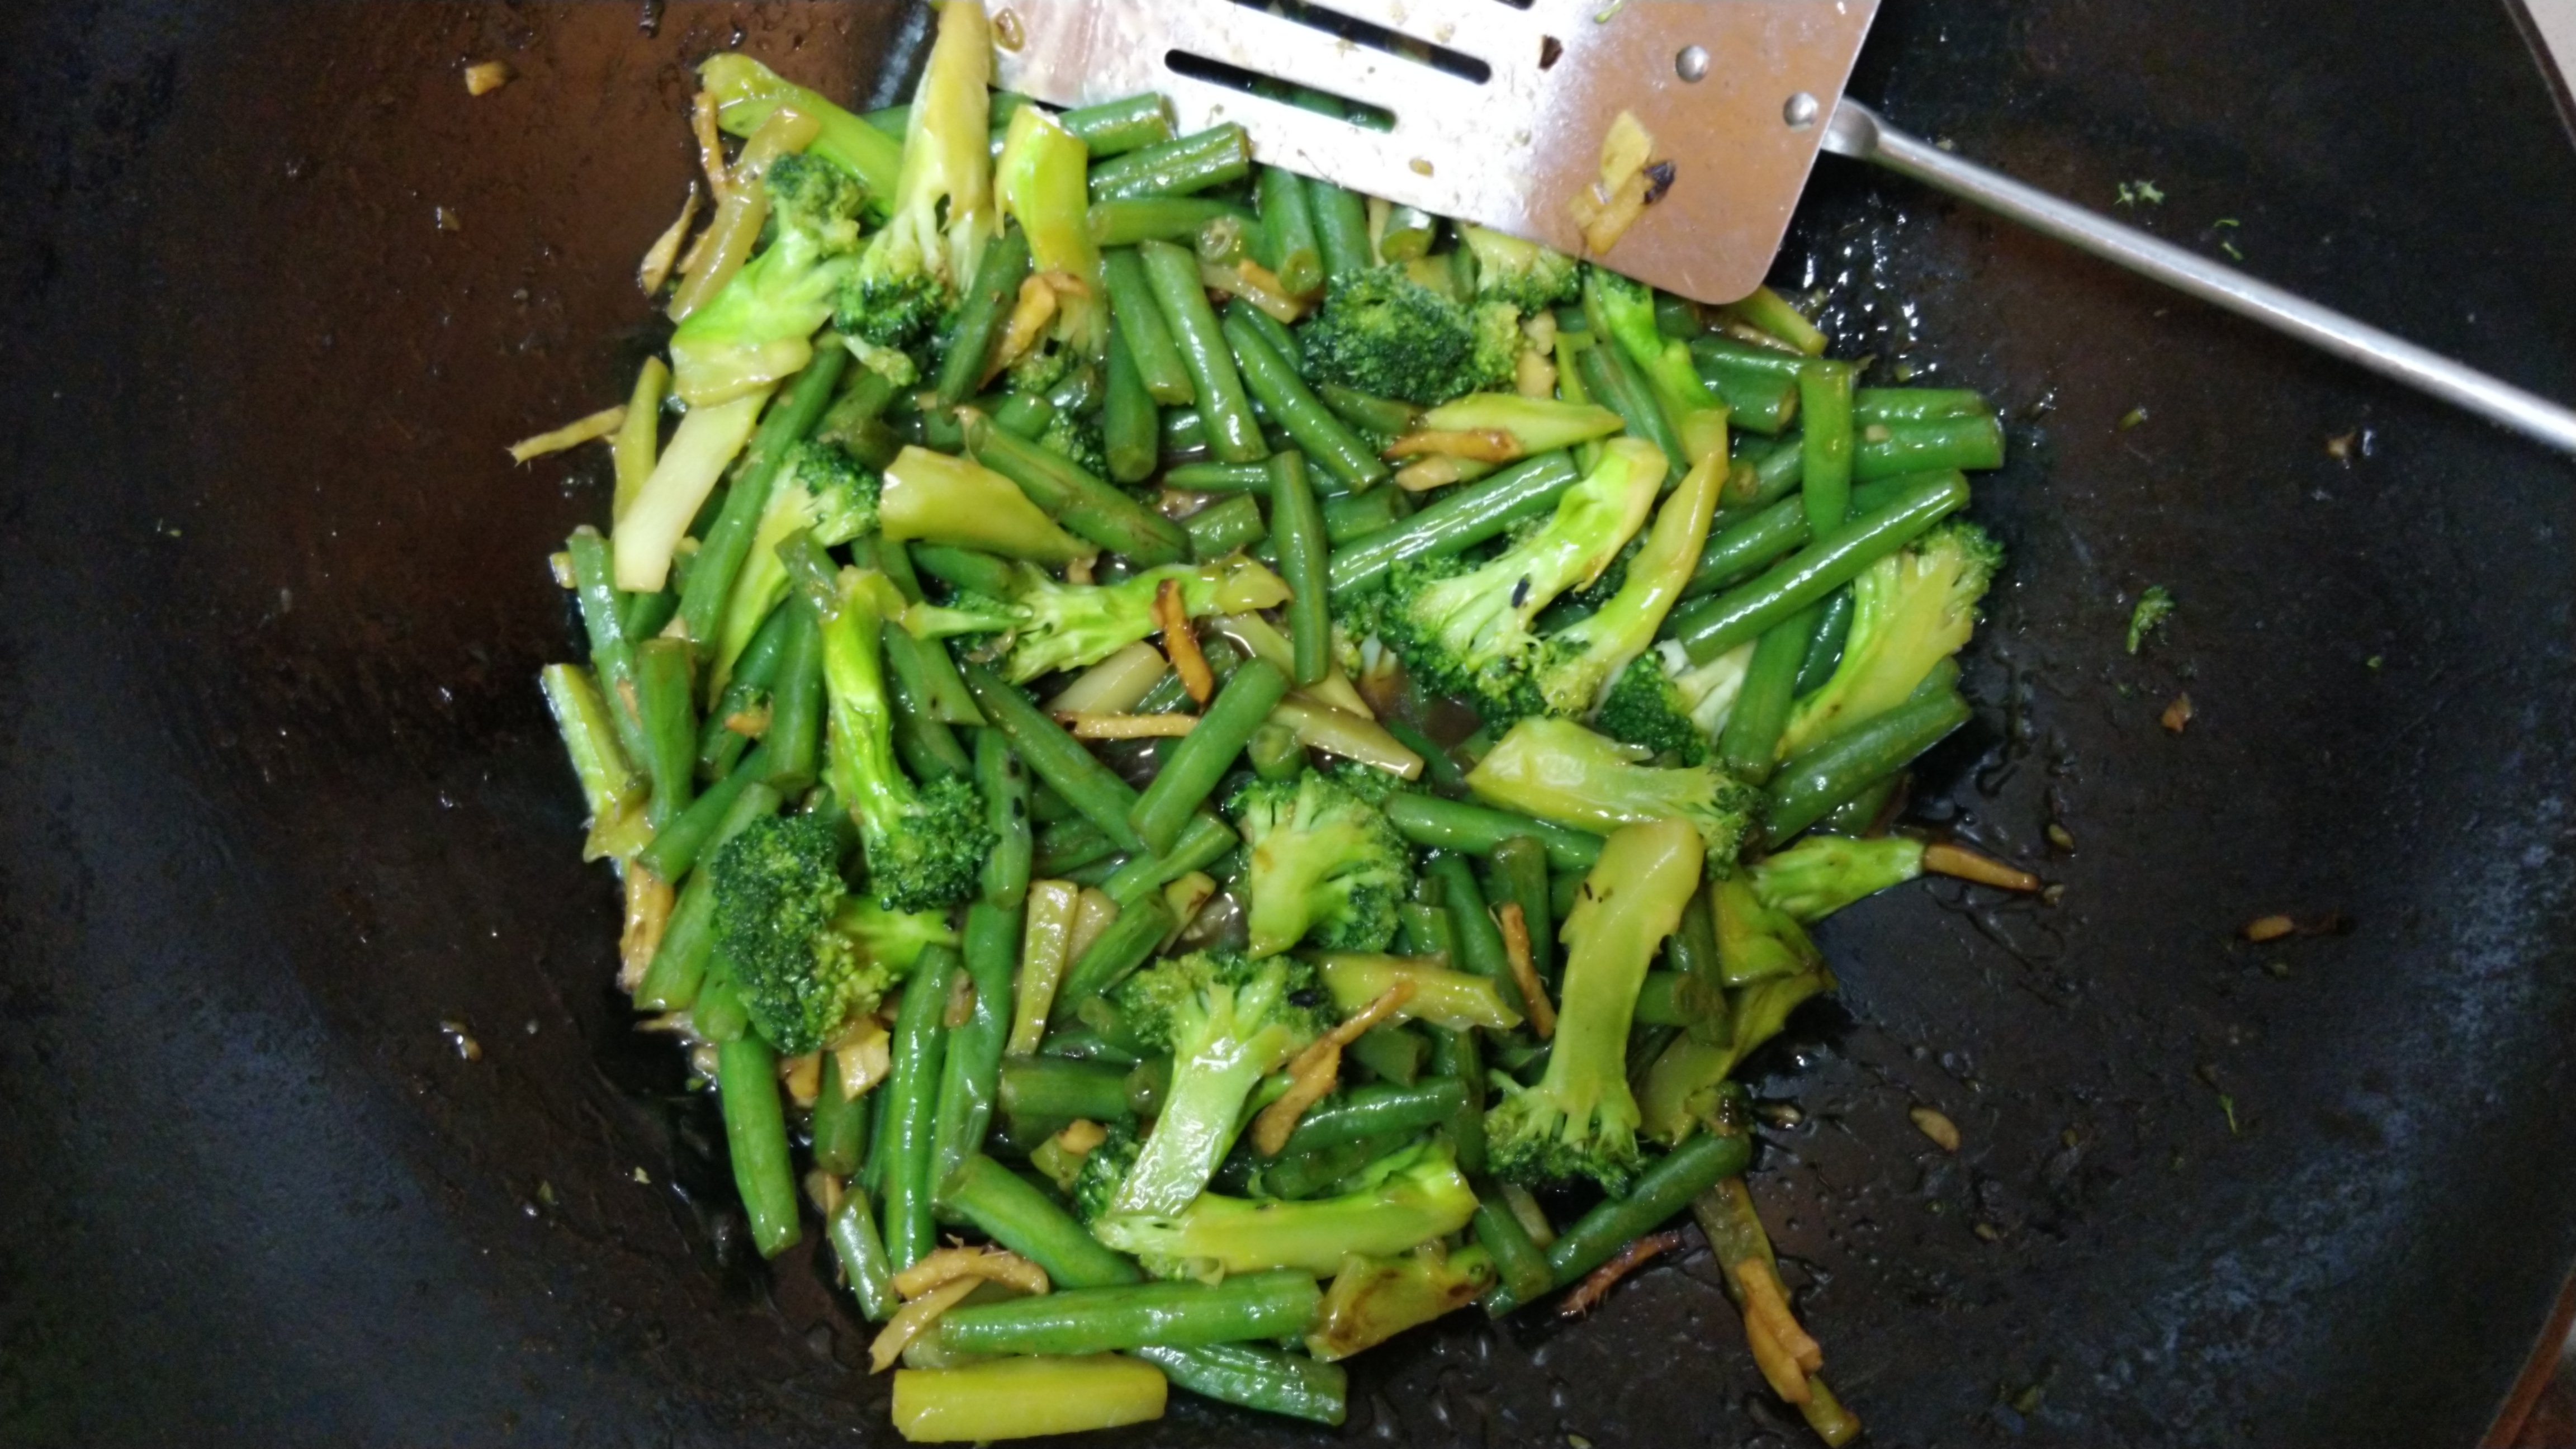 stir fried broccoli and green beans with ginger and garlic, in oyster sauce and shaoxing wine, in a wok on the stove